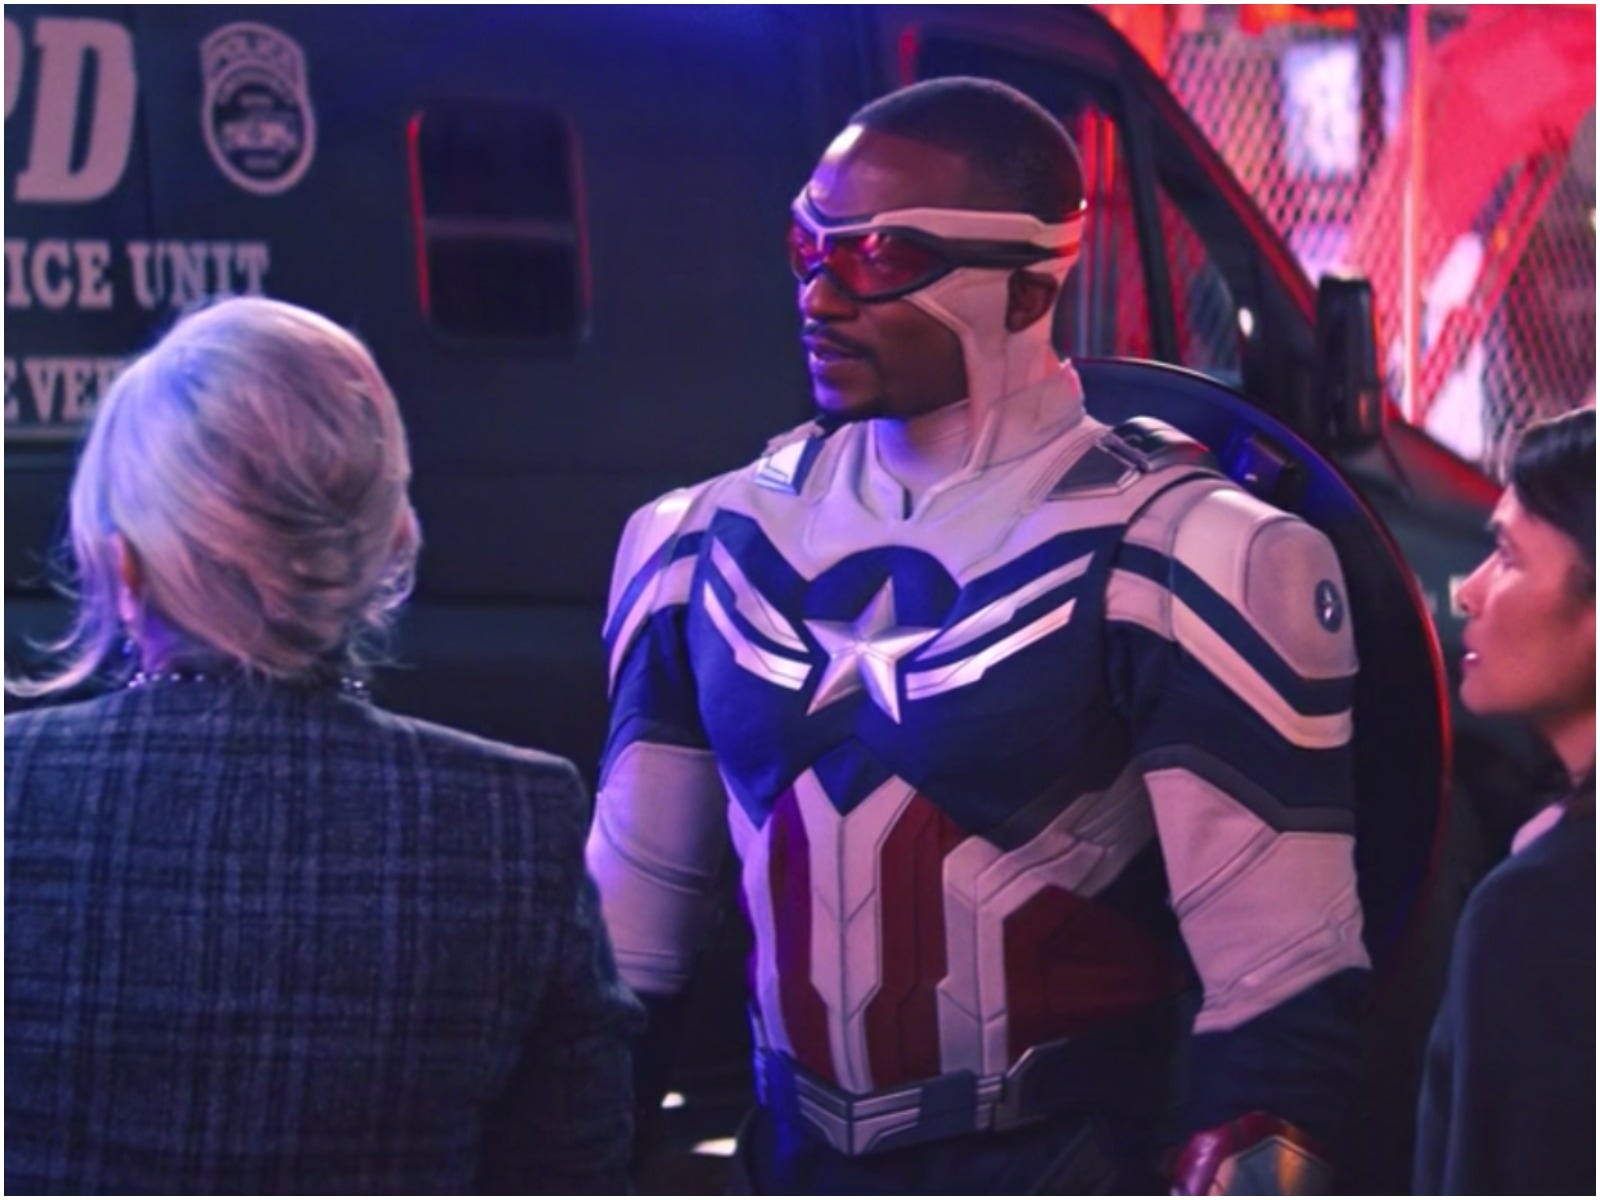 <p>Sam Wilson (Anthony Mackie) is the new Captain America in the fourth film in the franchise.</p><p>At the 2022 D23 Expo, Marvel Studios President Kevin Feige announced that Shira Haas would play superheroine Sabra while Tim Blake Nelson will reprise his role from 2008's "The Incredible Hulk" as The Leader, a Hulk villain.</p><p>Danny Ramirez and Carl Lumbly will also reprise their roles from "The Falcon and the Winter Soldier." Director Julius Onah ("The Cloverfield Paradox") described the sequel as a thriller.</p>